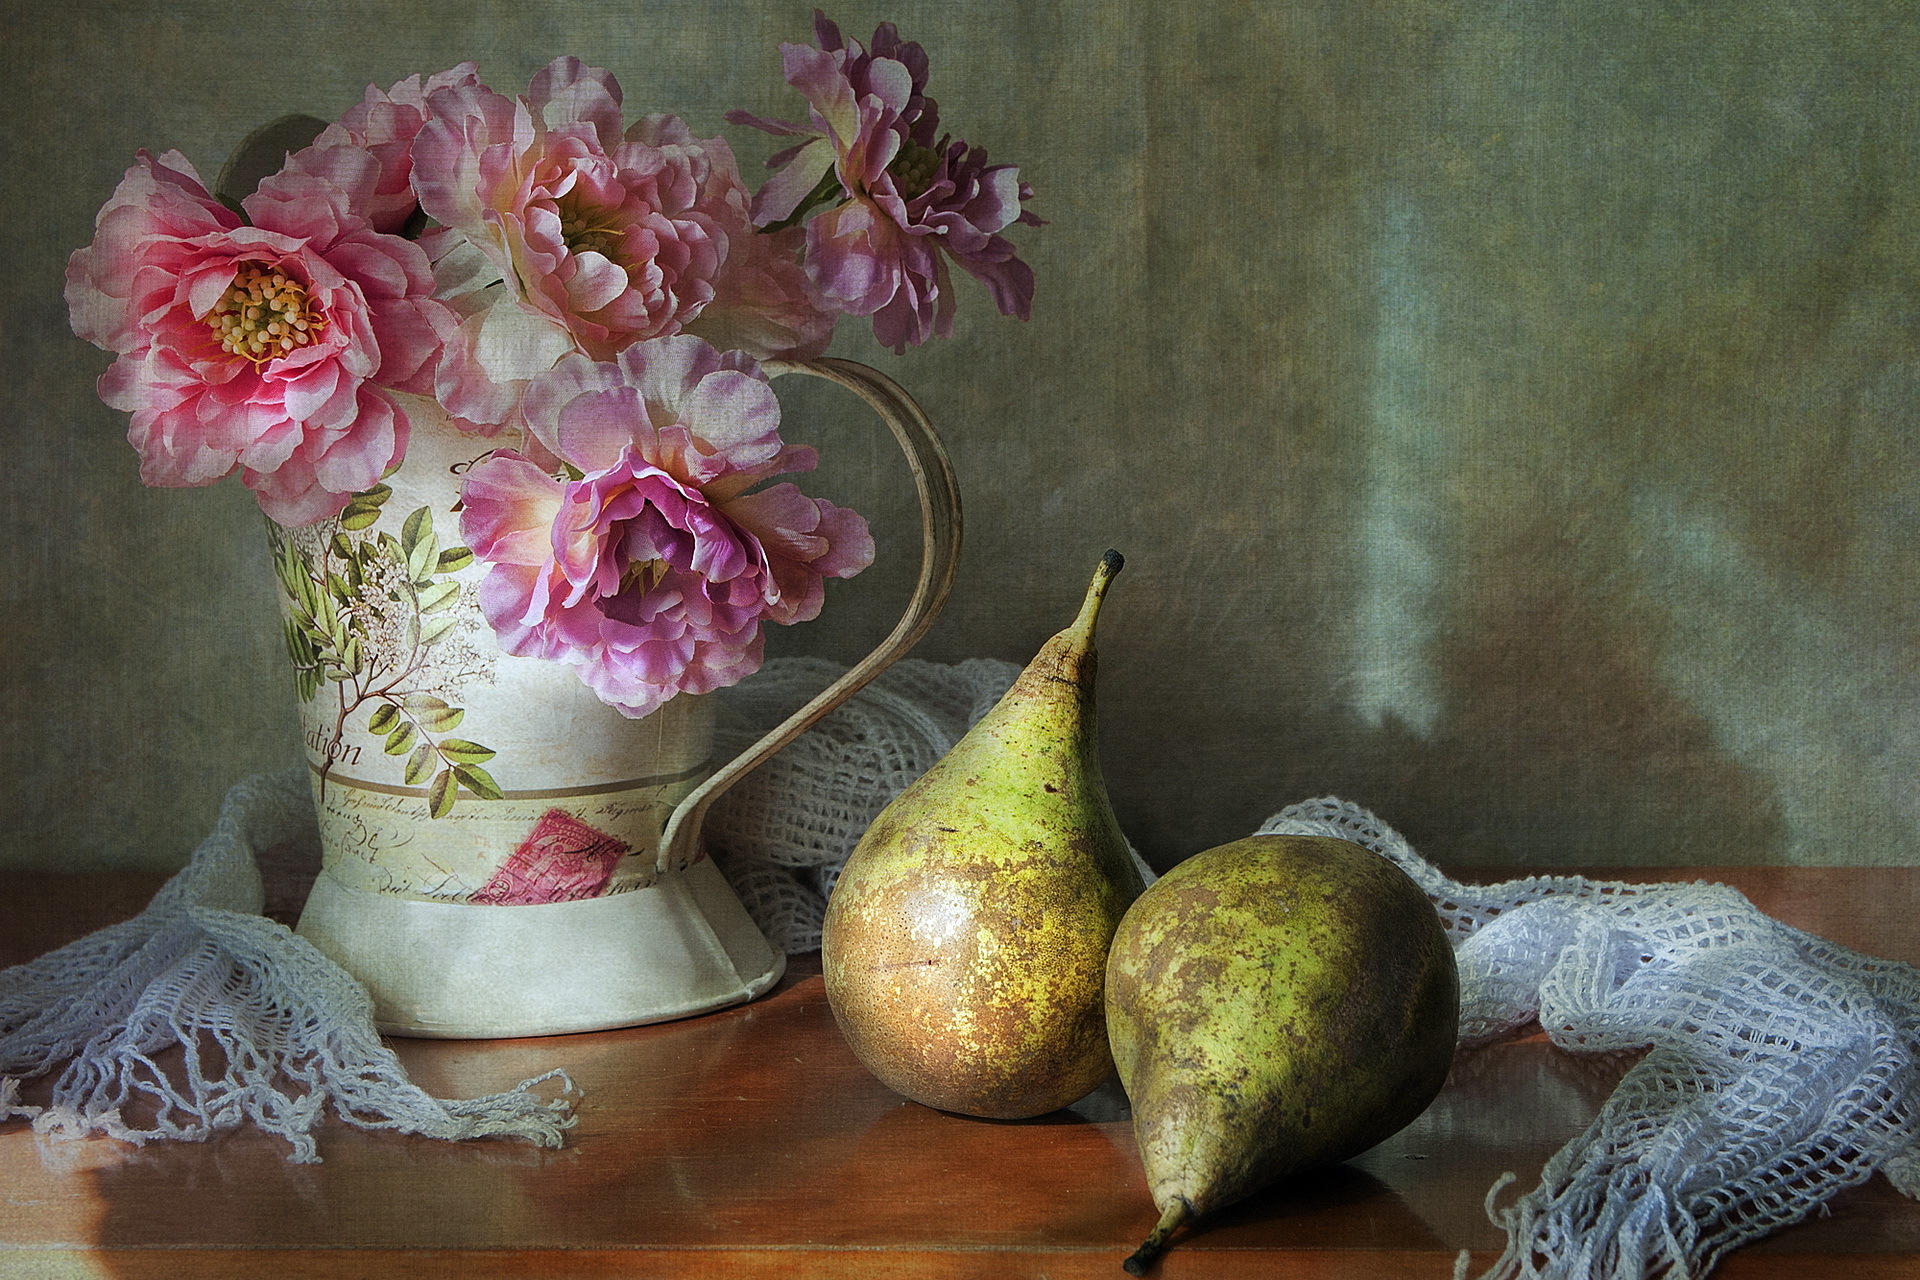 photography, still life, flower, pear, pitcher, scarf